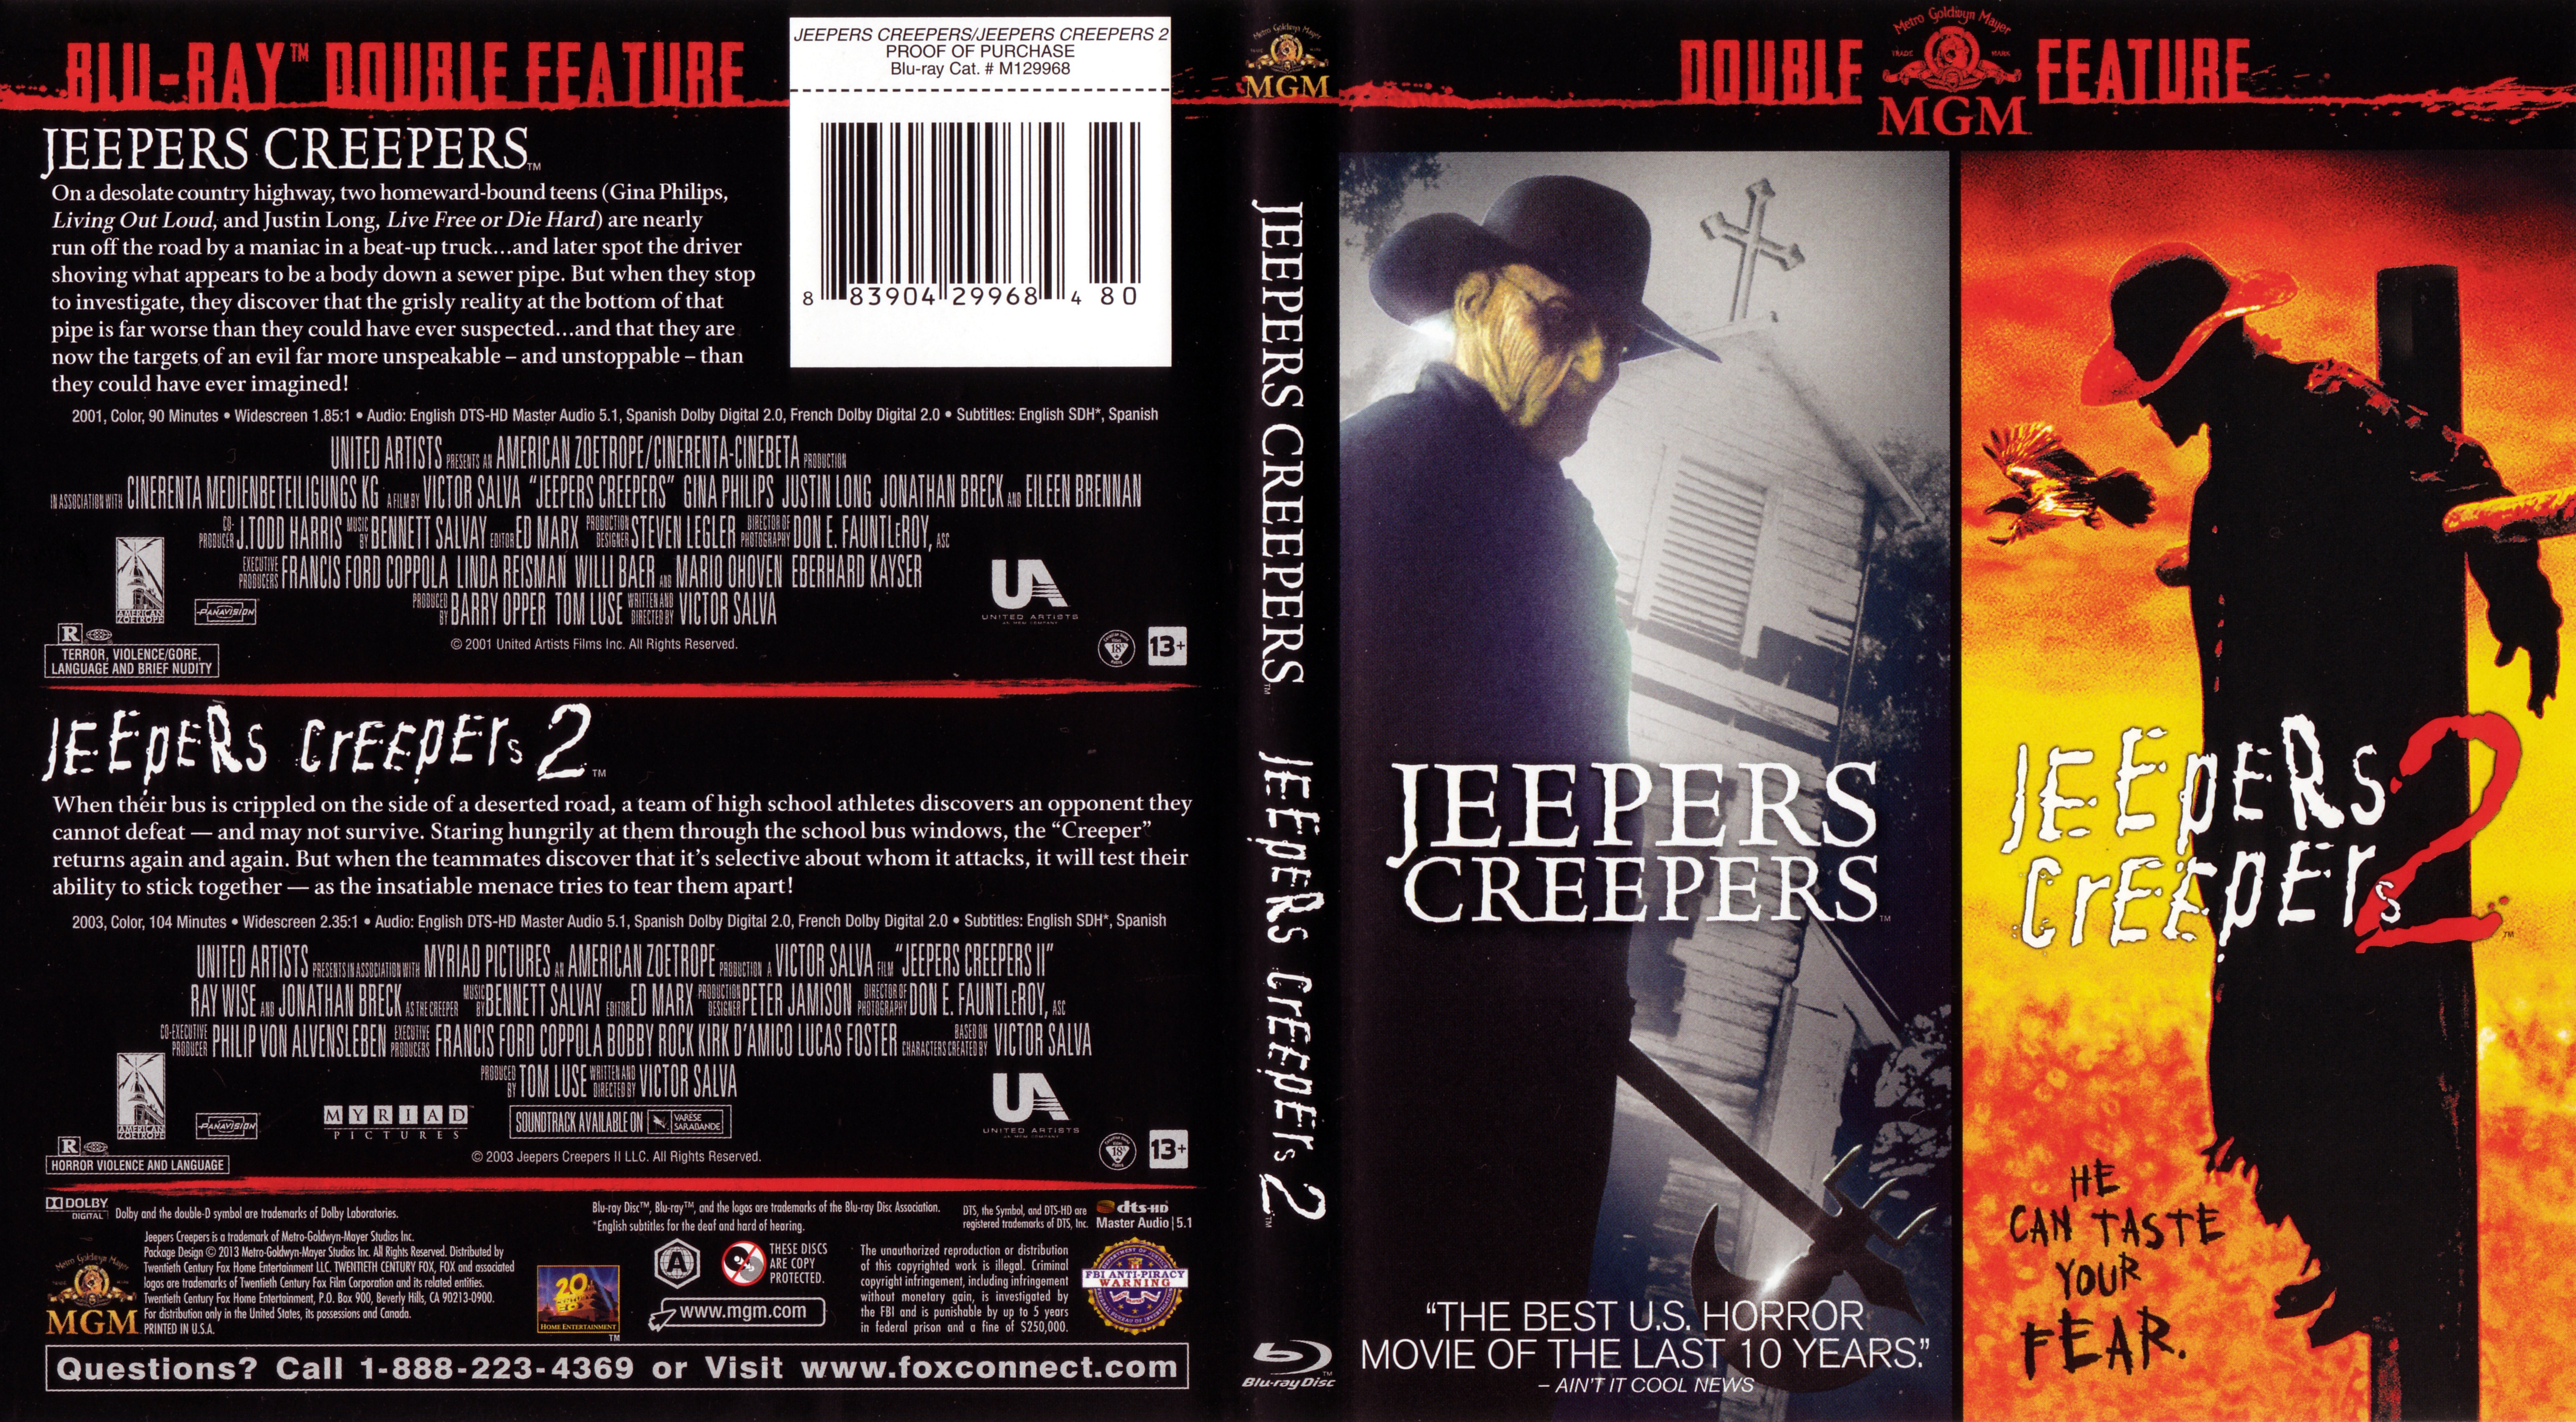 Jaquette DVD Jeepers Creepers 1 + 2 Zone 1 (BLU-RAY)